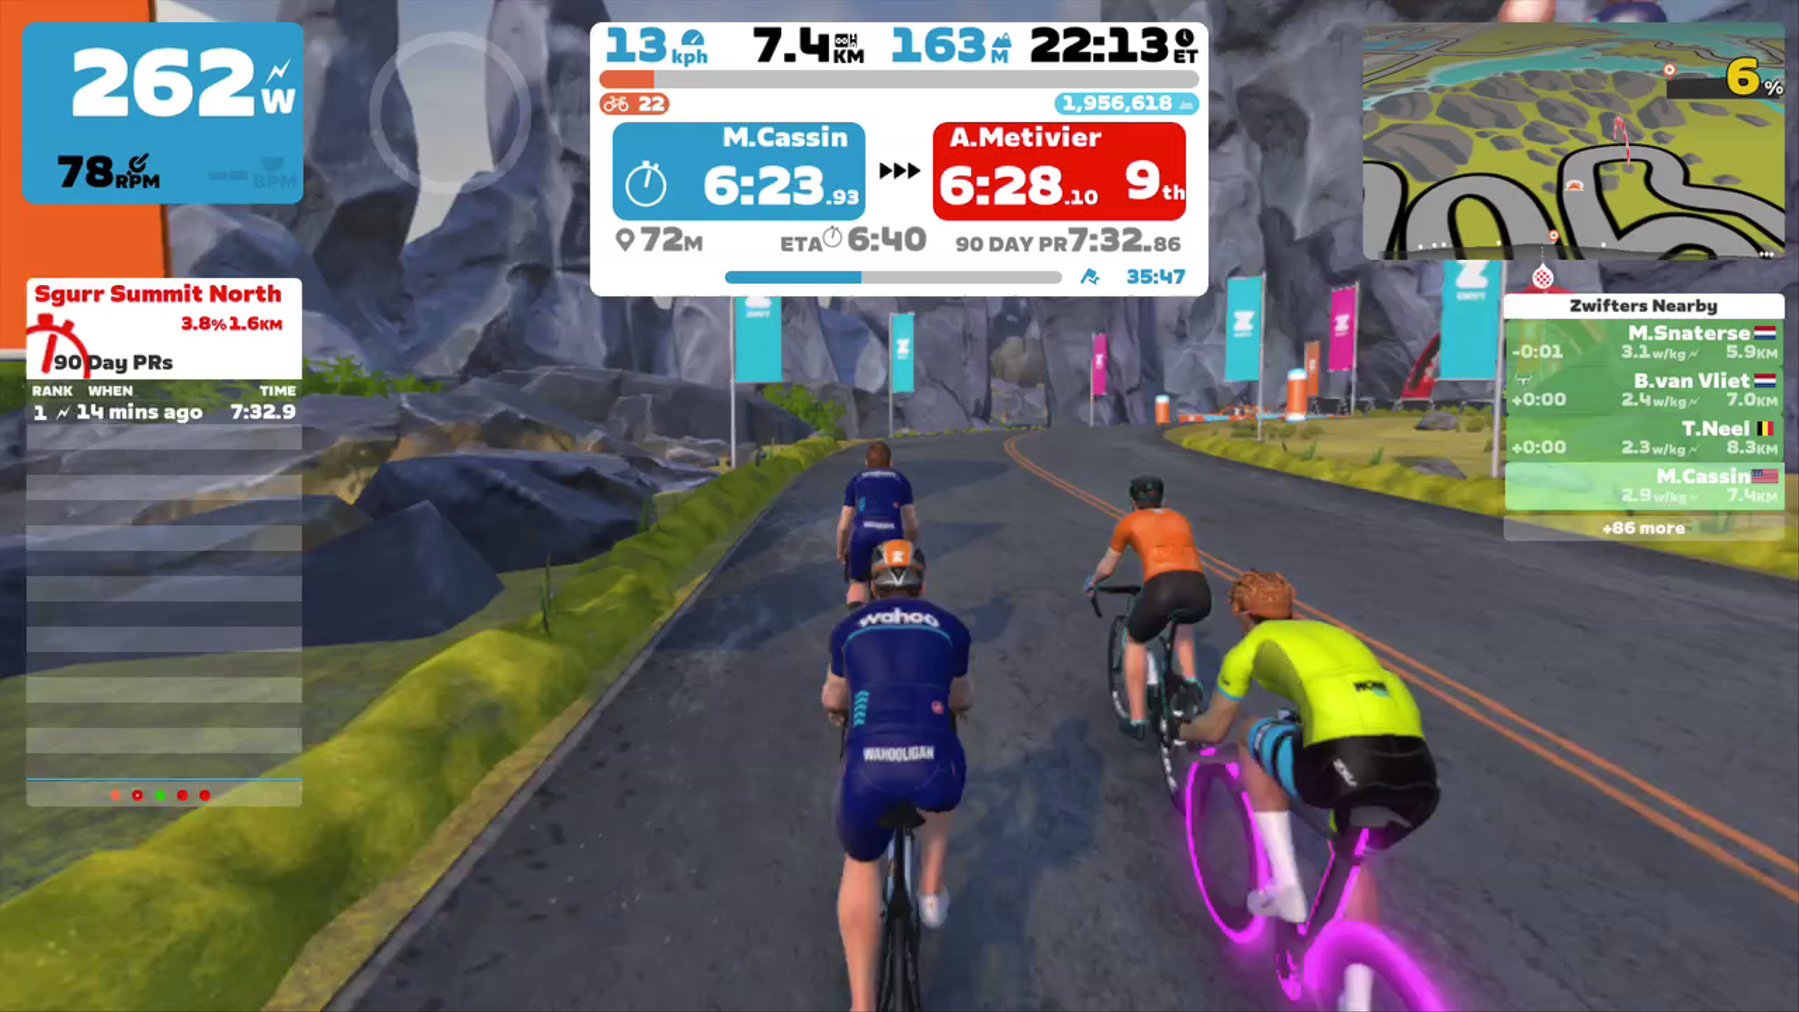 Zwift - Fons van Nuland's Meetup on City and the Sgurr in Scotland